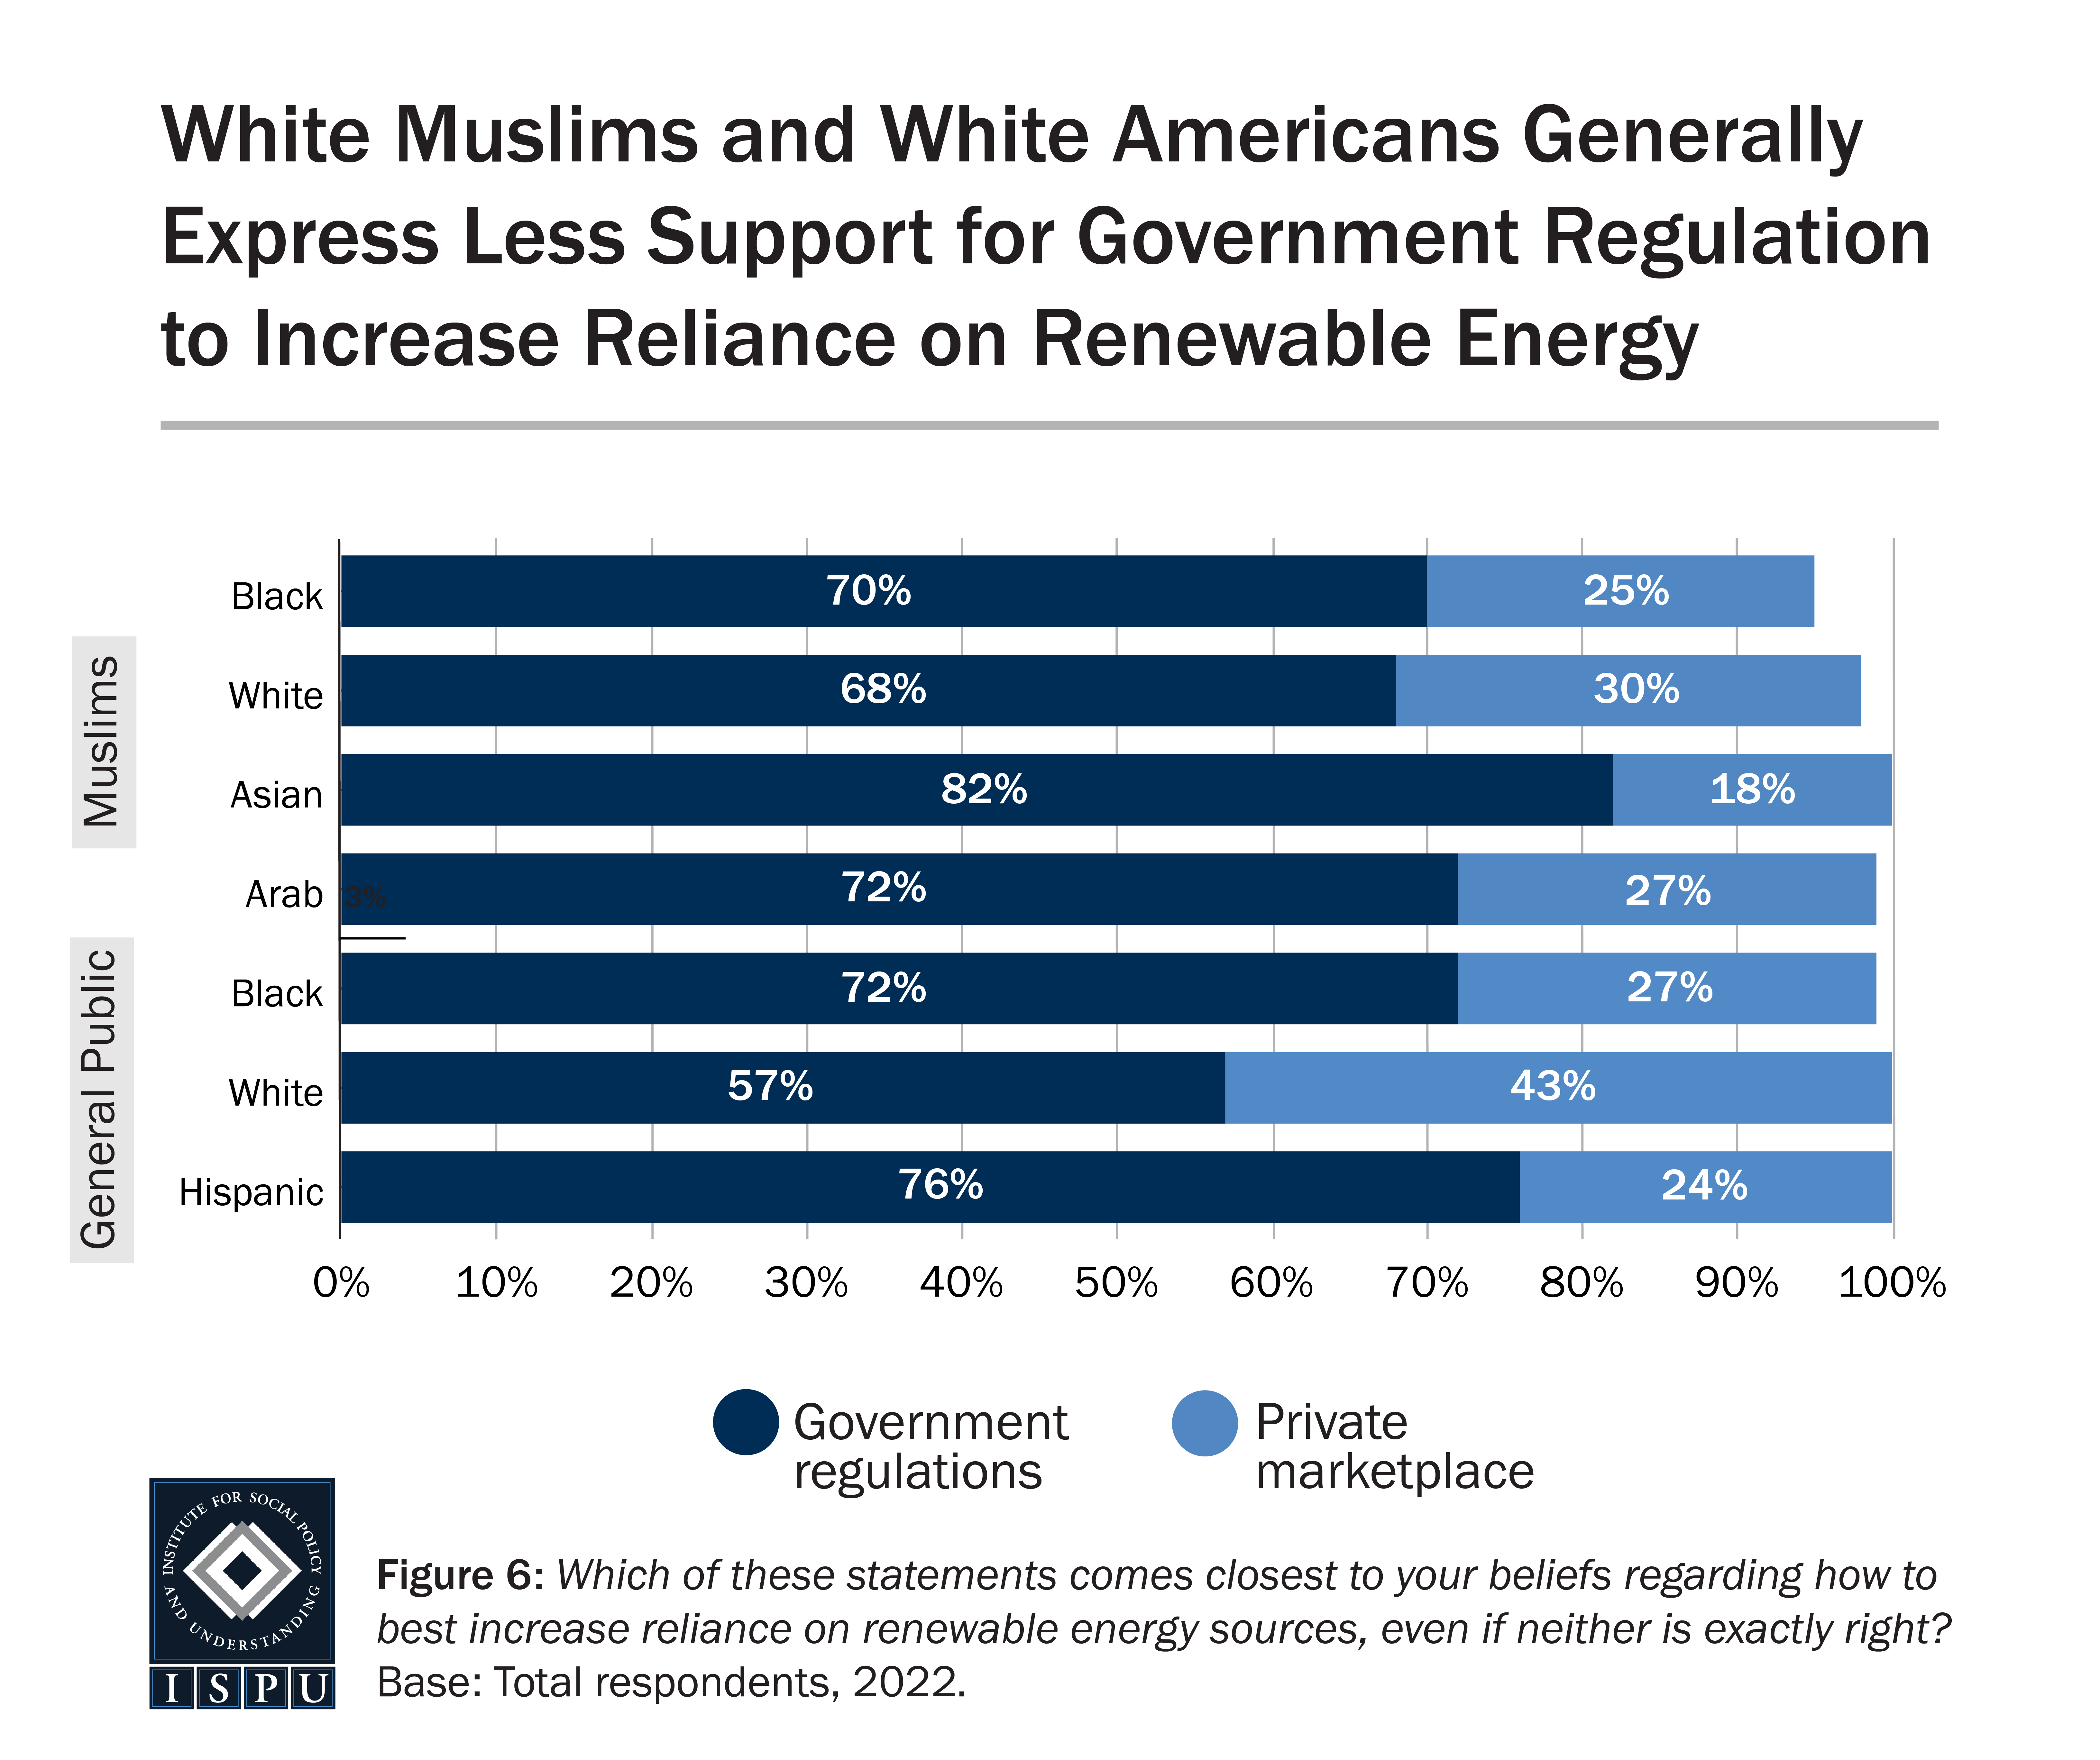 A stacked bar graph showing the proportion of different racial/ethnic groups groups among Muslims and the general public who say the solution to increasing reliance on renewable energy is government regulations or the private marketplace.